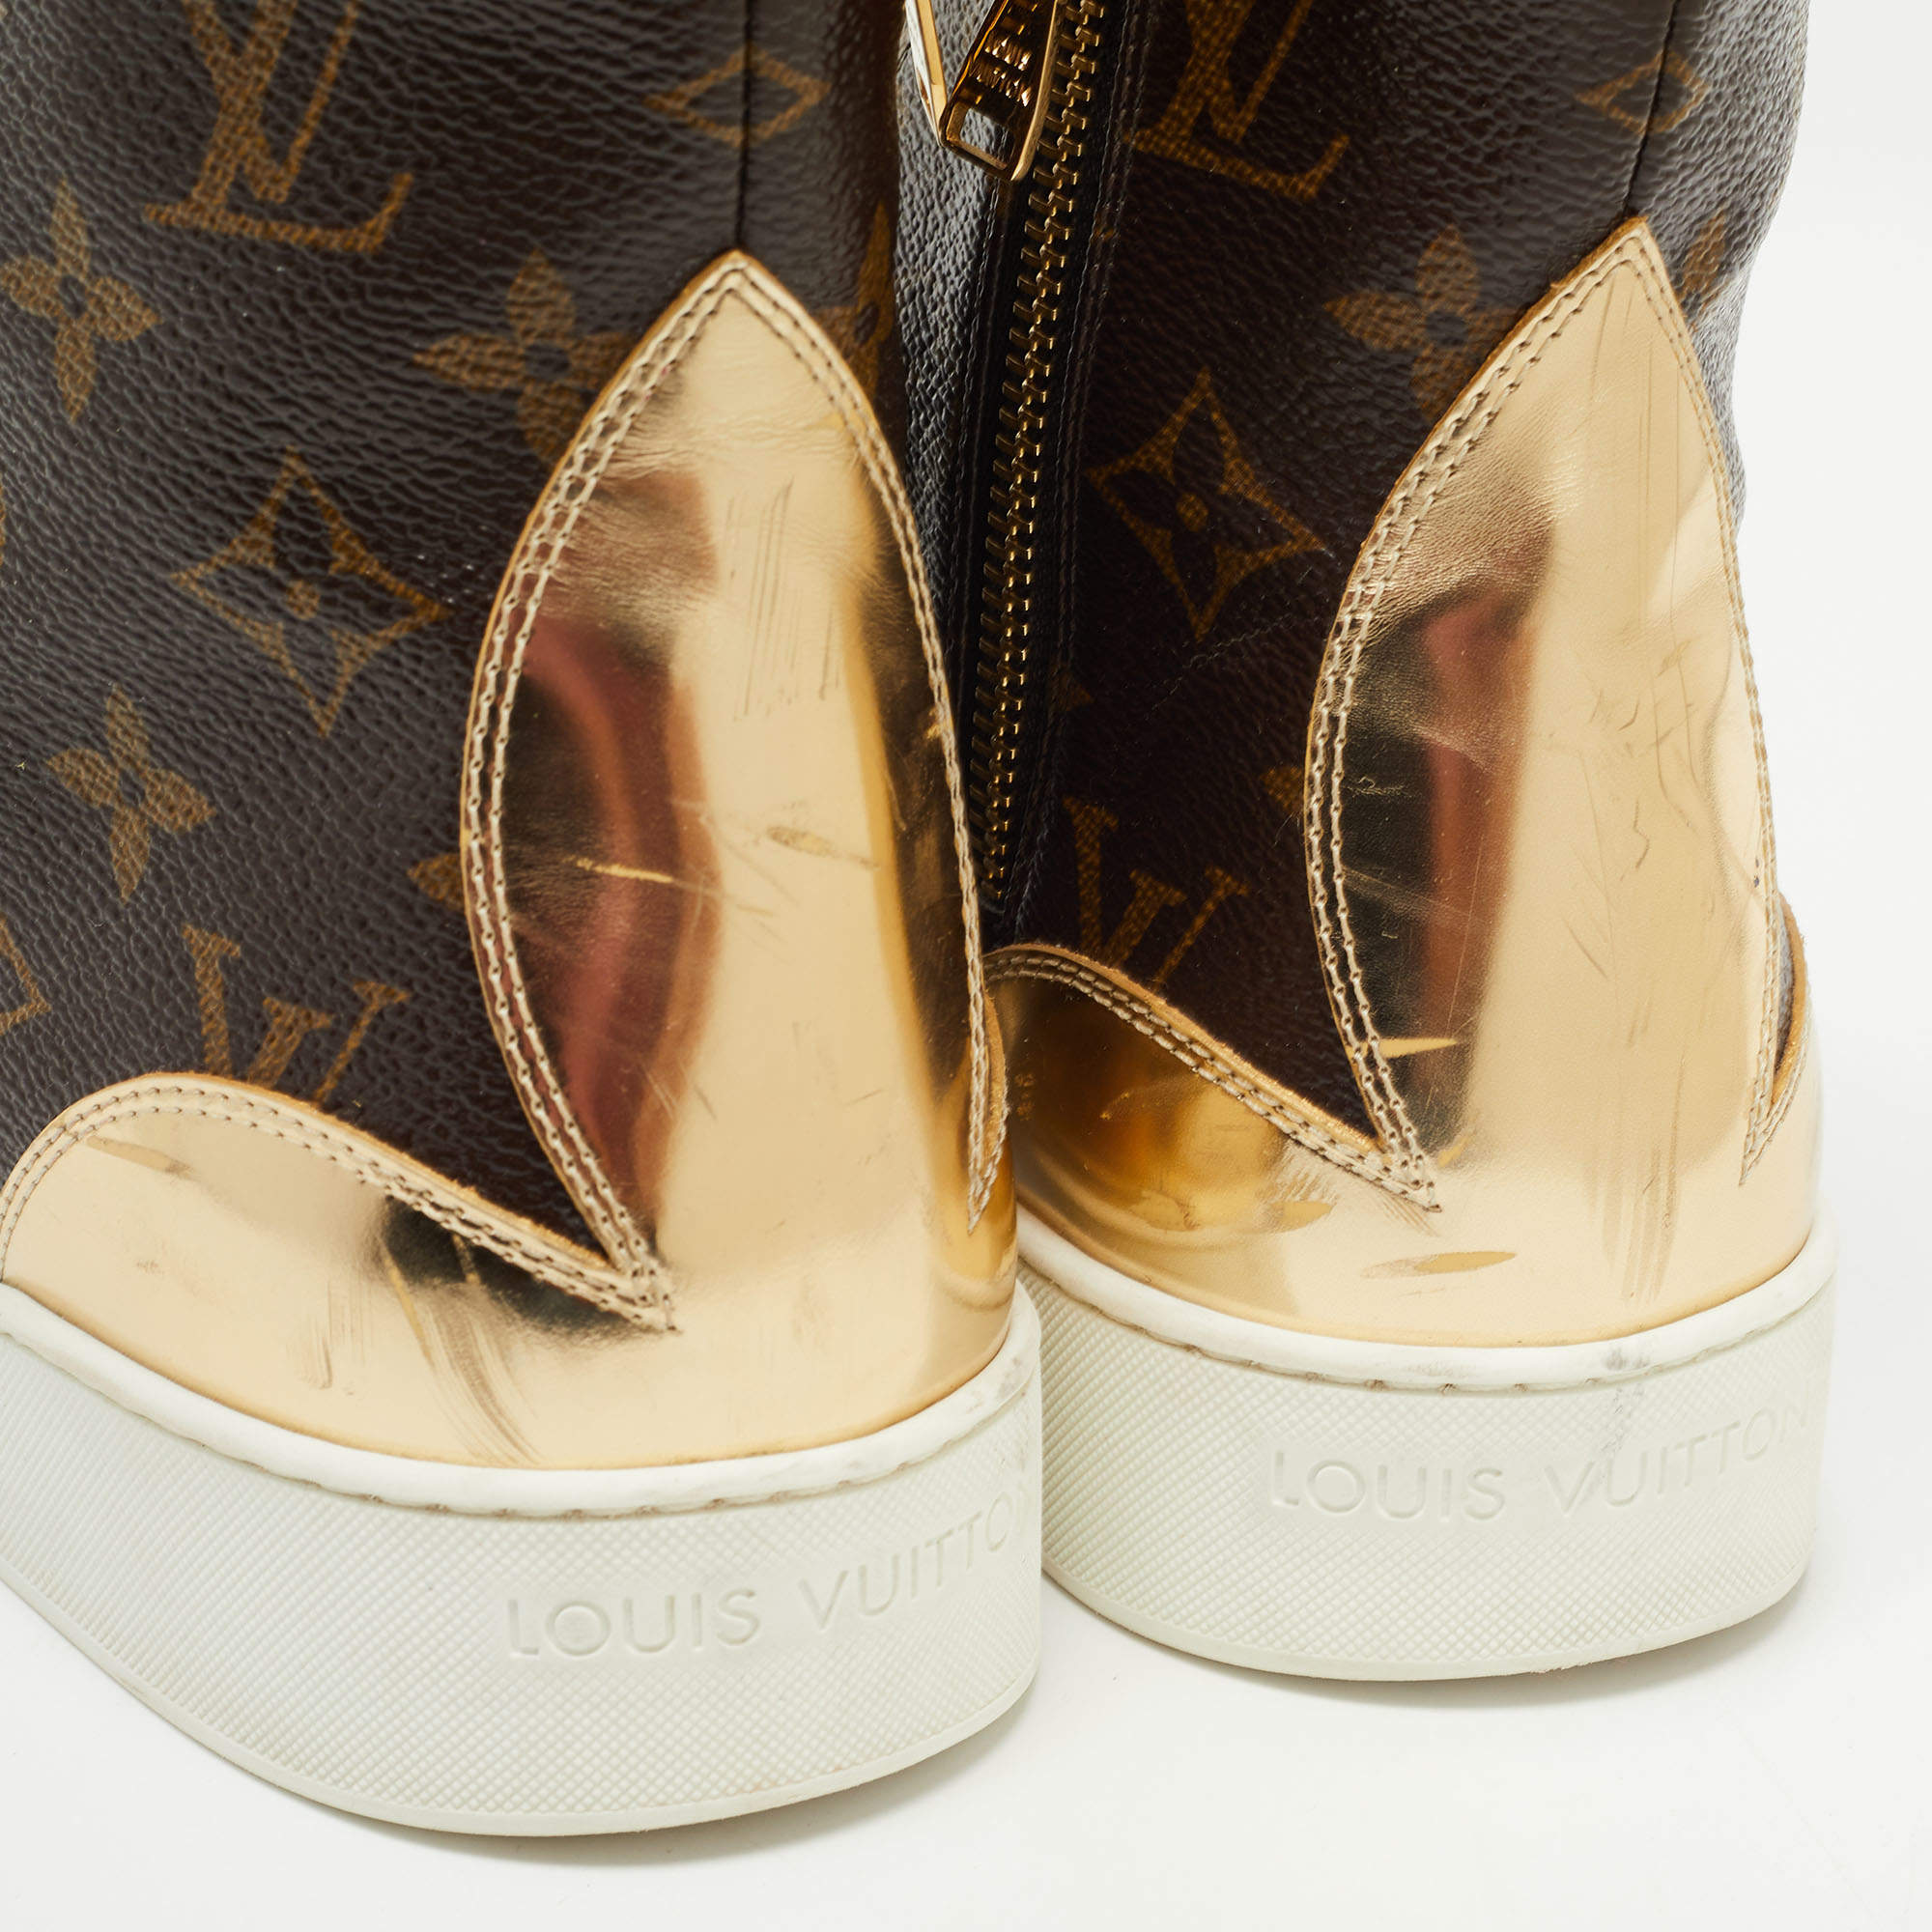 Louis Vuitton Brown Monogram Canvas and Leather Stellar Sneakers Size 39  Louis Vuitton